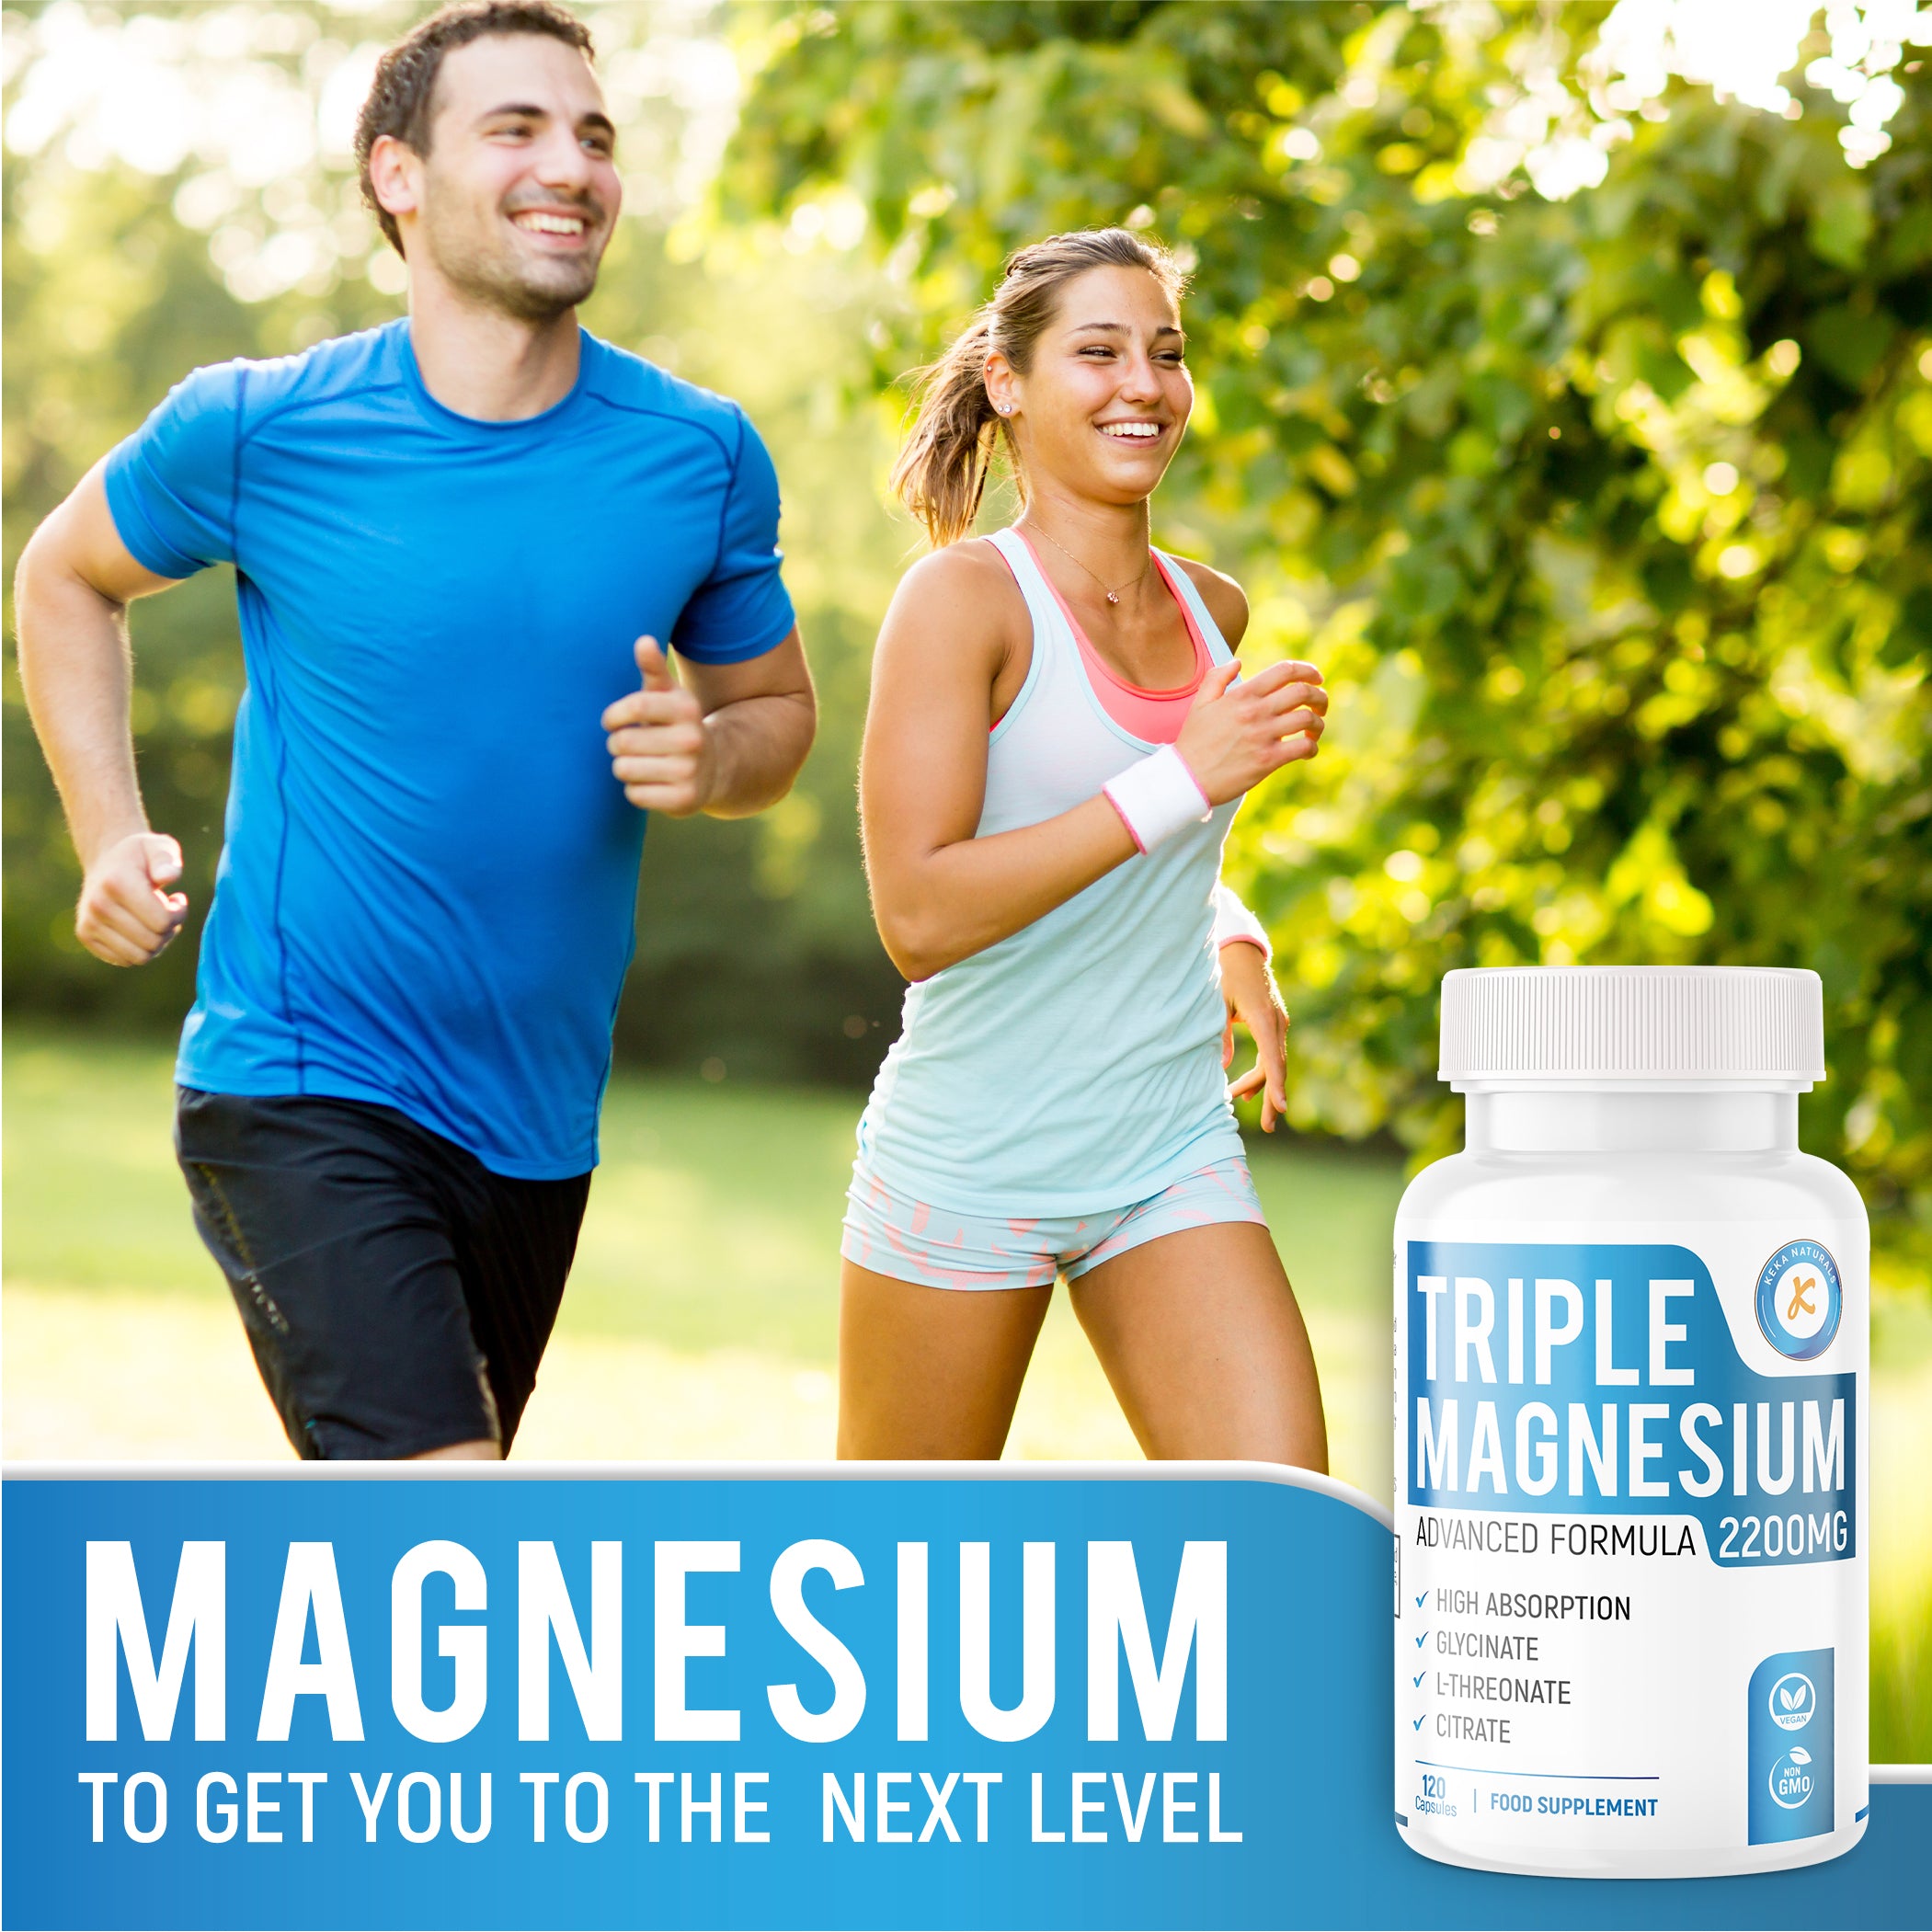 Triple Magnesium 2200mg for the best absorption and great health